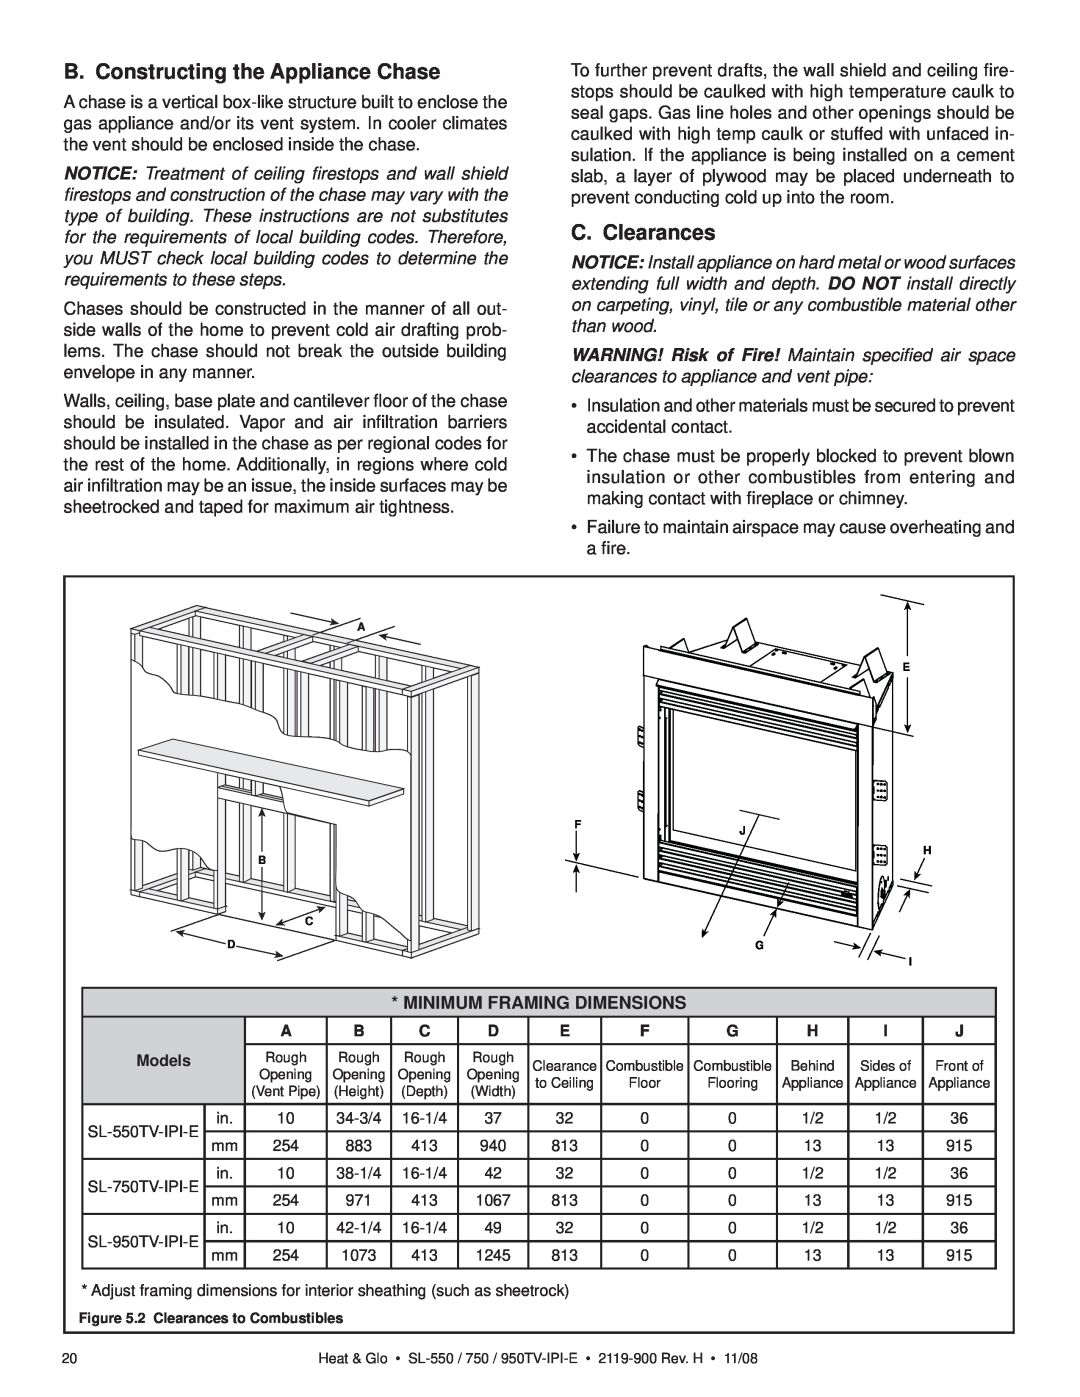 Hearth and Home Technologies SL-950TV-IPI-E B. Constructing the Appliance Chase, C. Clearances, Minimum Framing Dimensions 